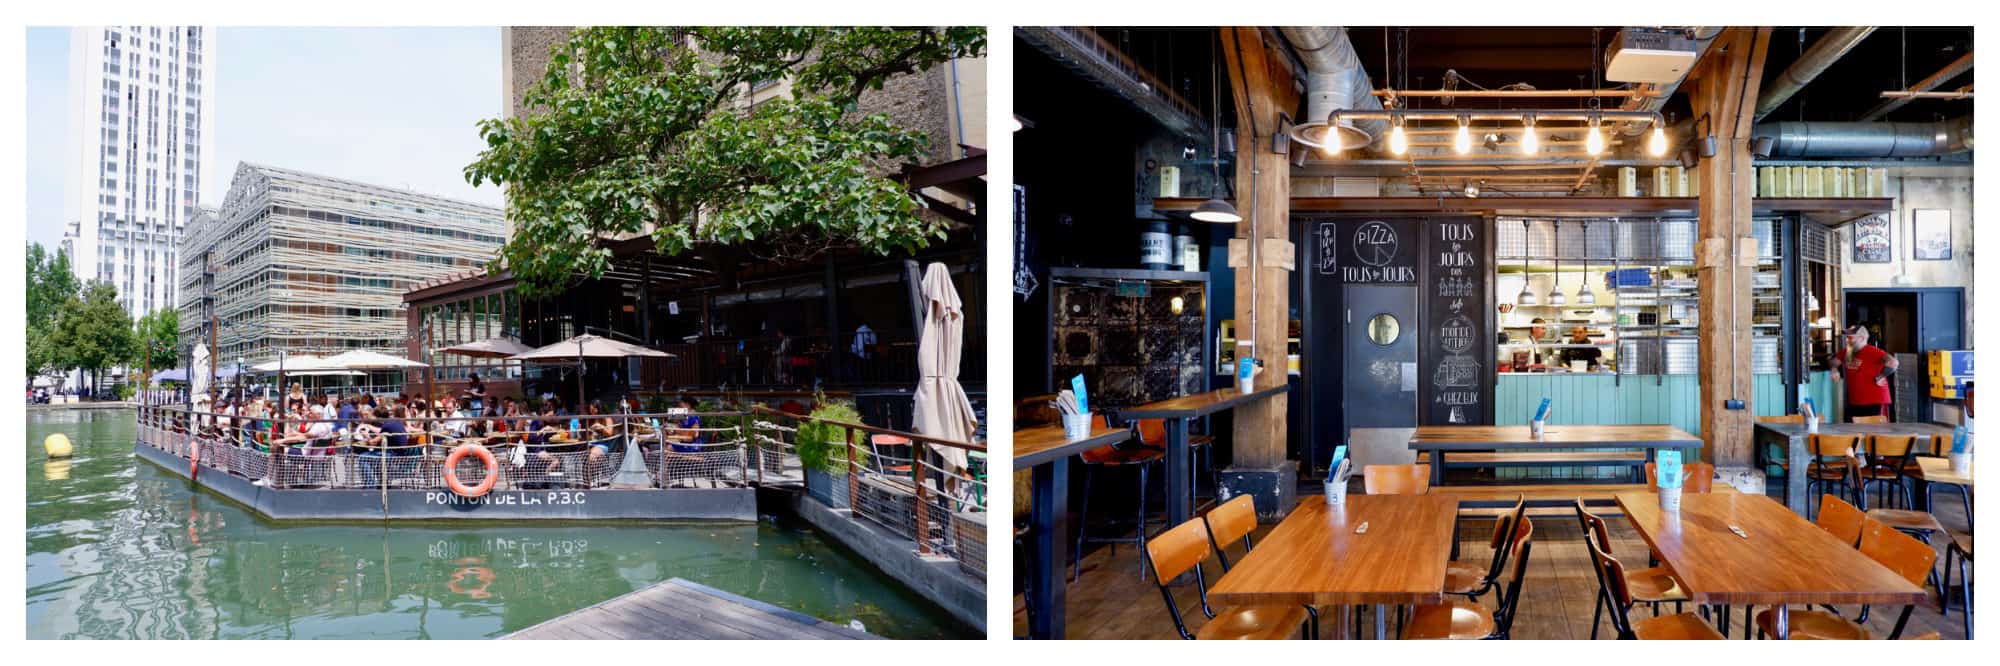 The terrace reaching out across the water of the Canal de l'Ourcq at the Paname Brewing Company in Paris on a sunny summer's day (left). The industrial interiors of Paris Brewing Company on the Canal de l'Ourcq (right).